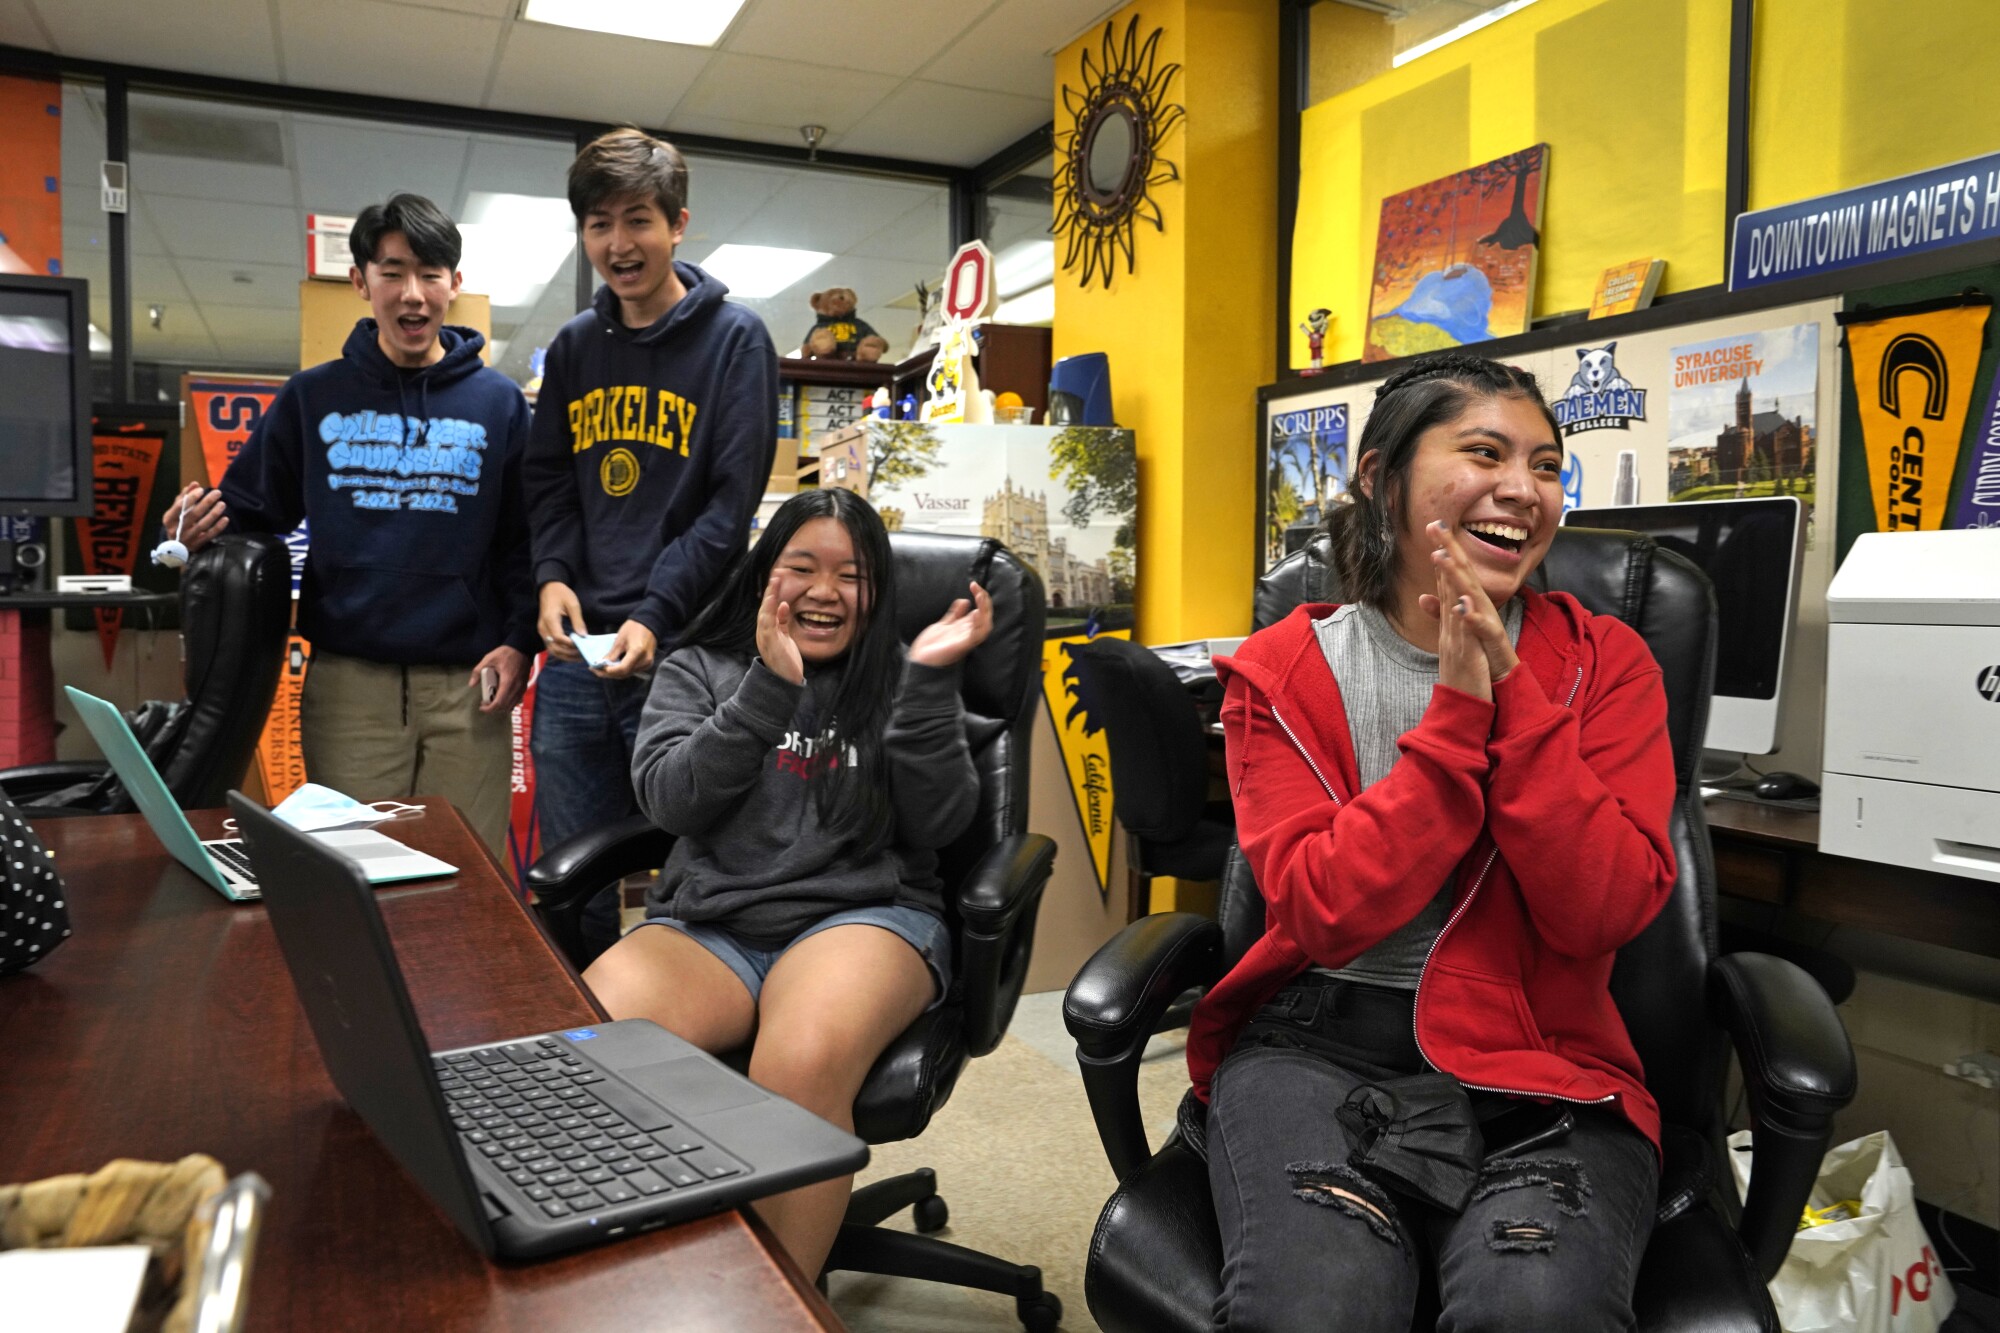 Two female students smile and clap while two male students standing nearby smile.